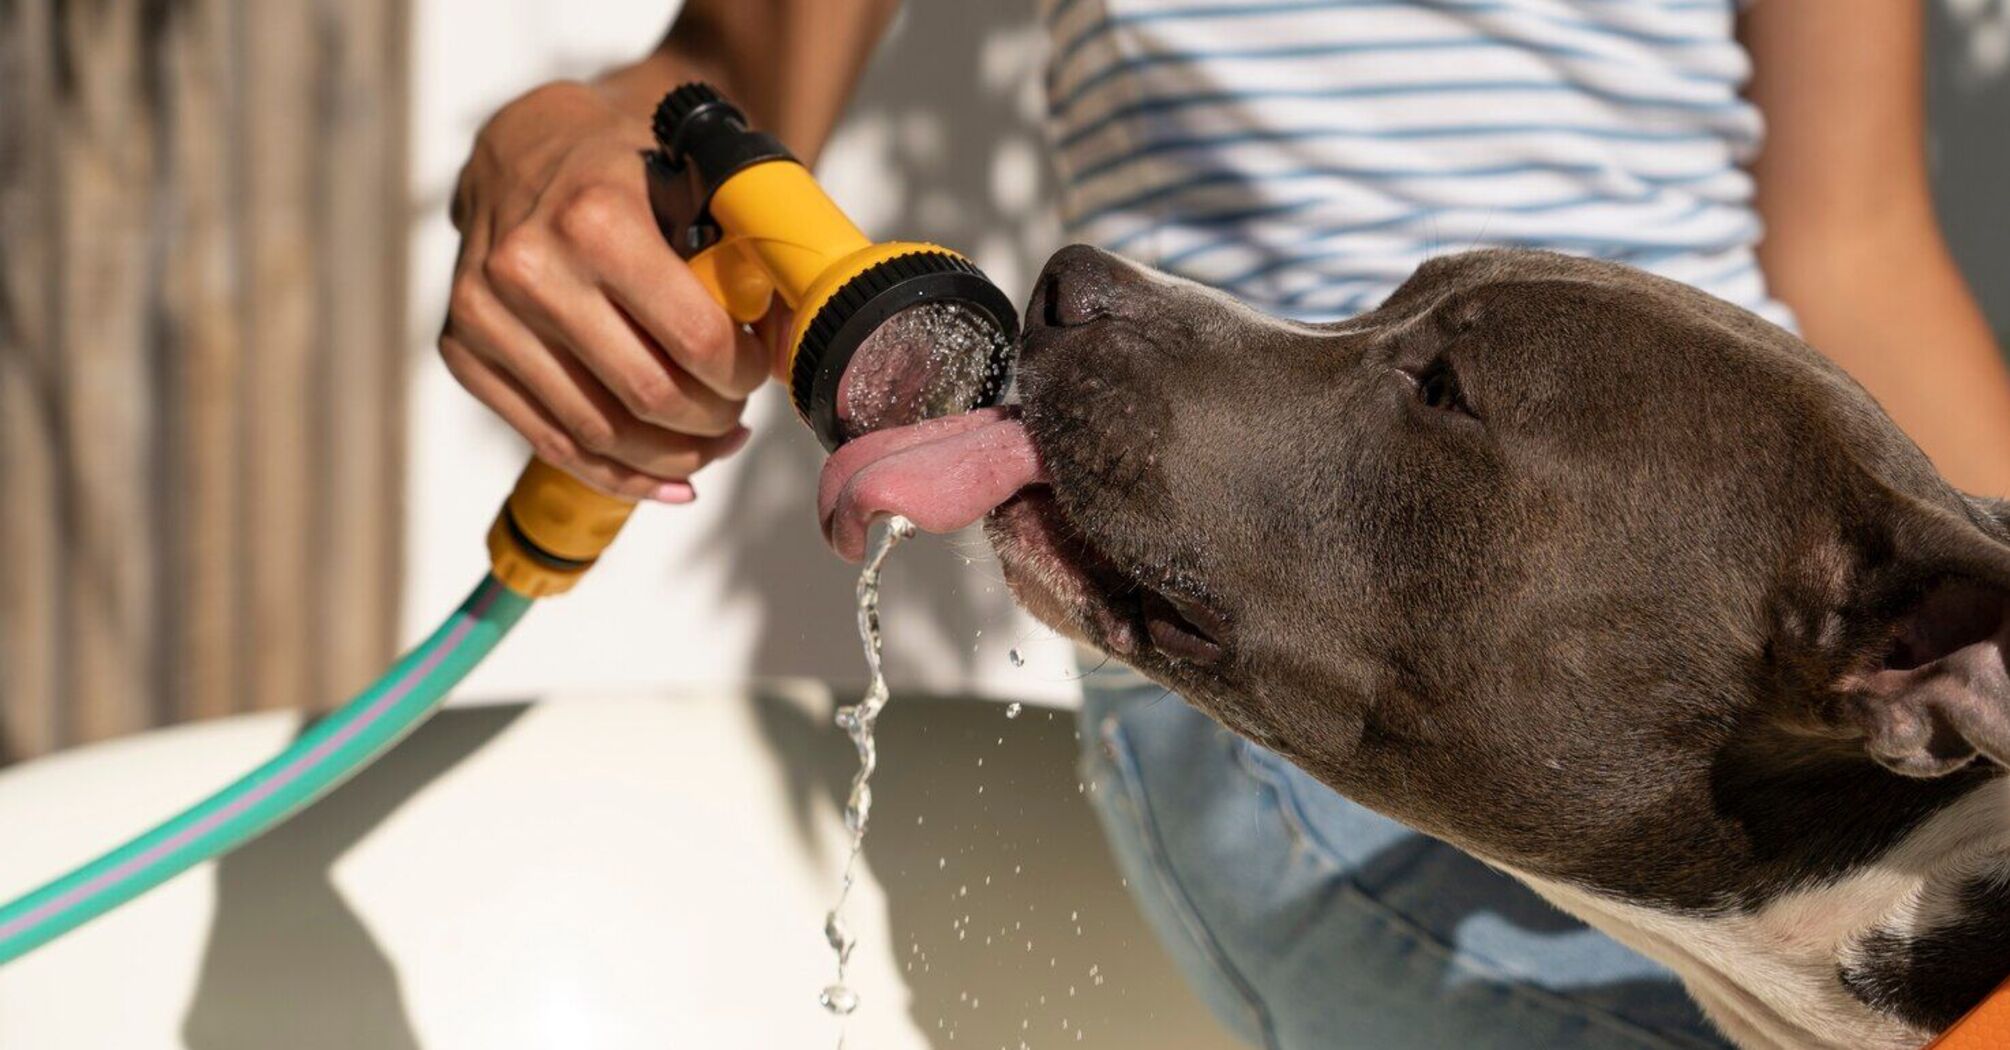 How to help your pets survive the heat: main rules